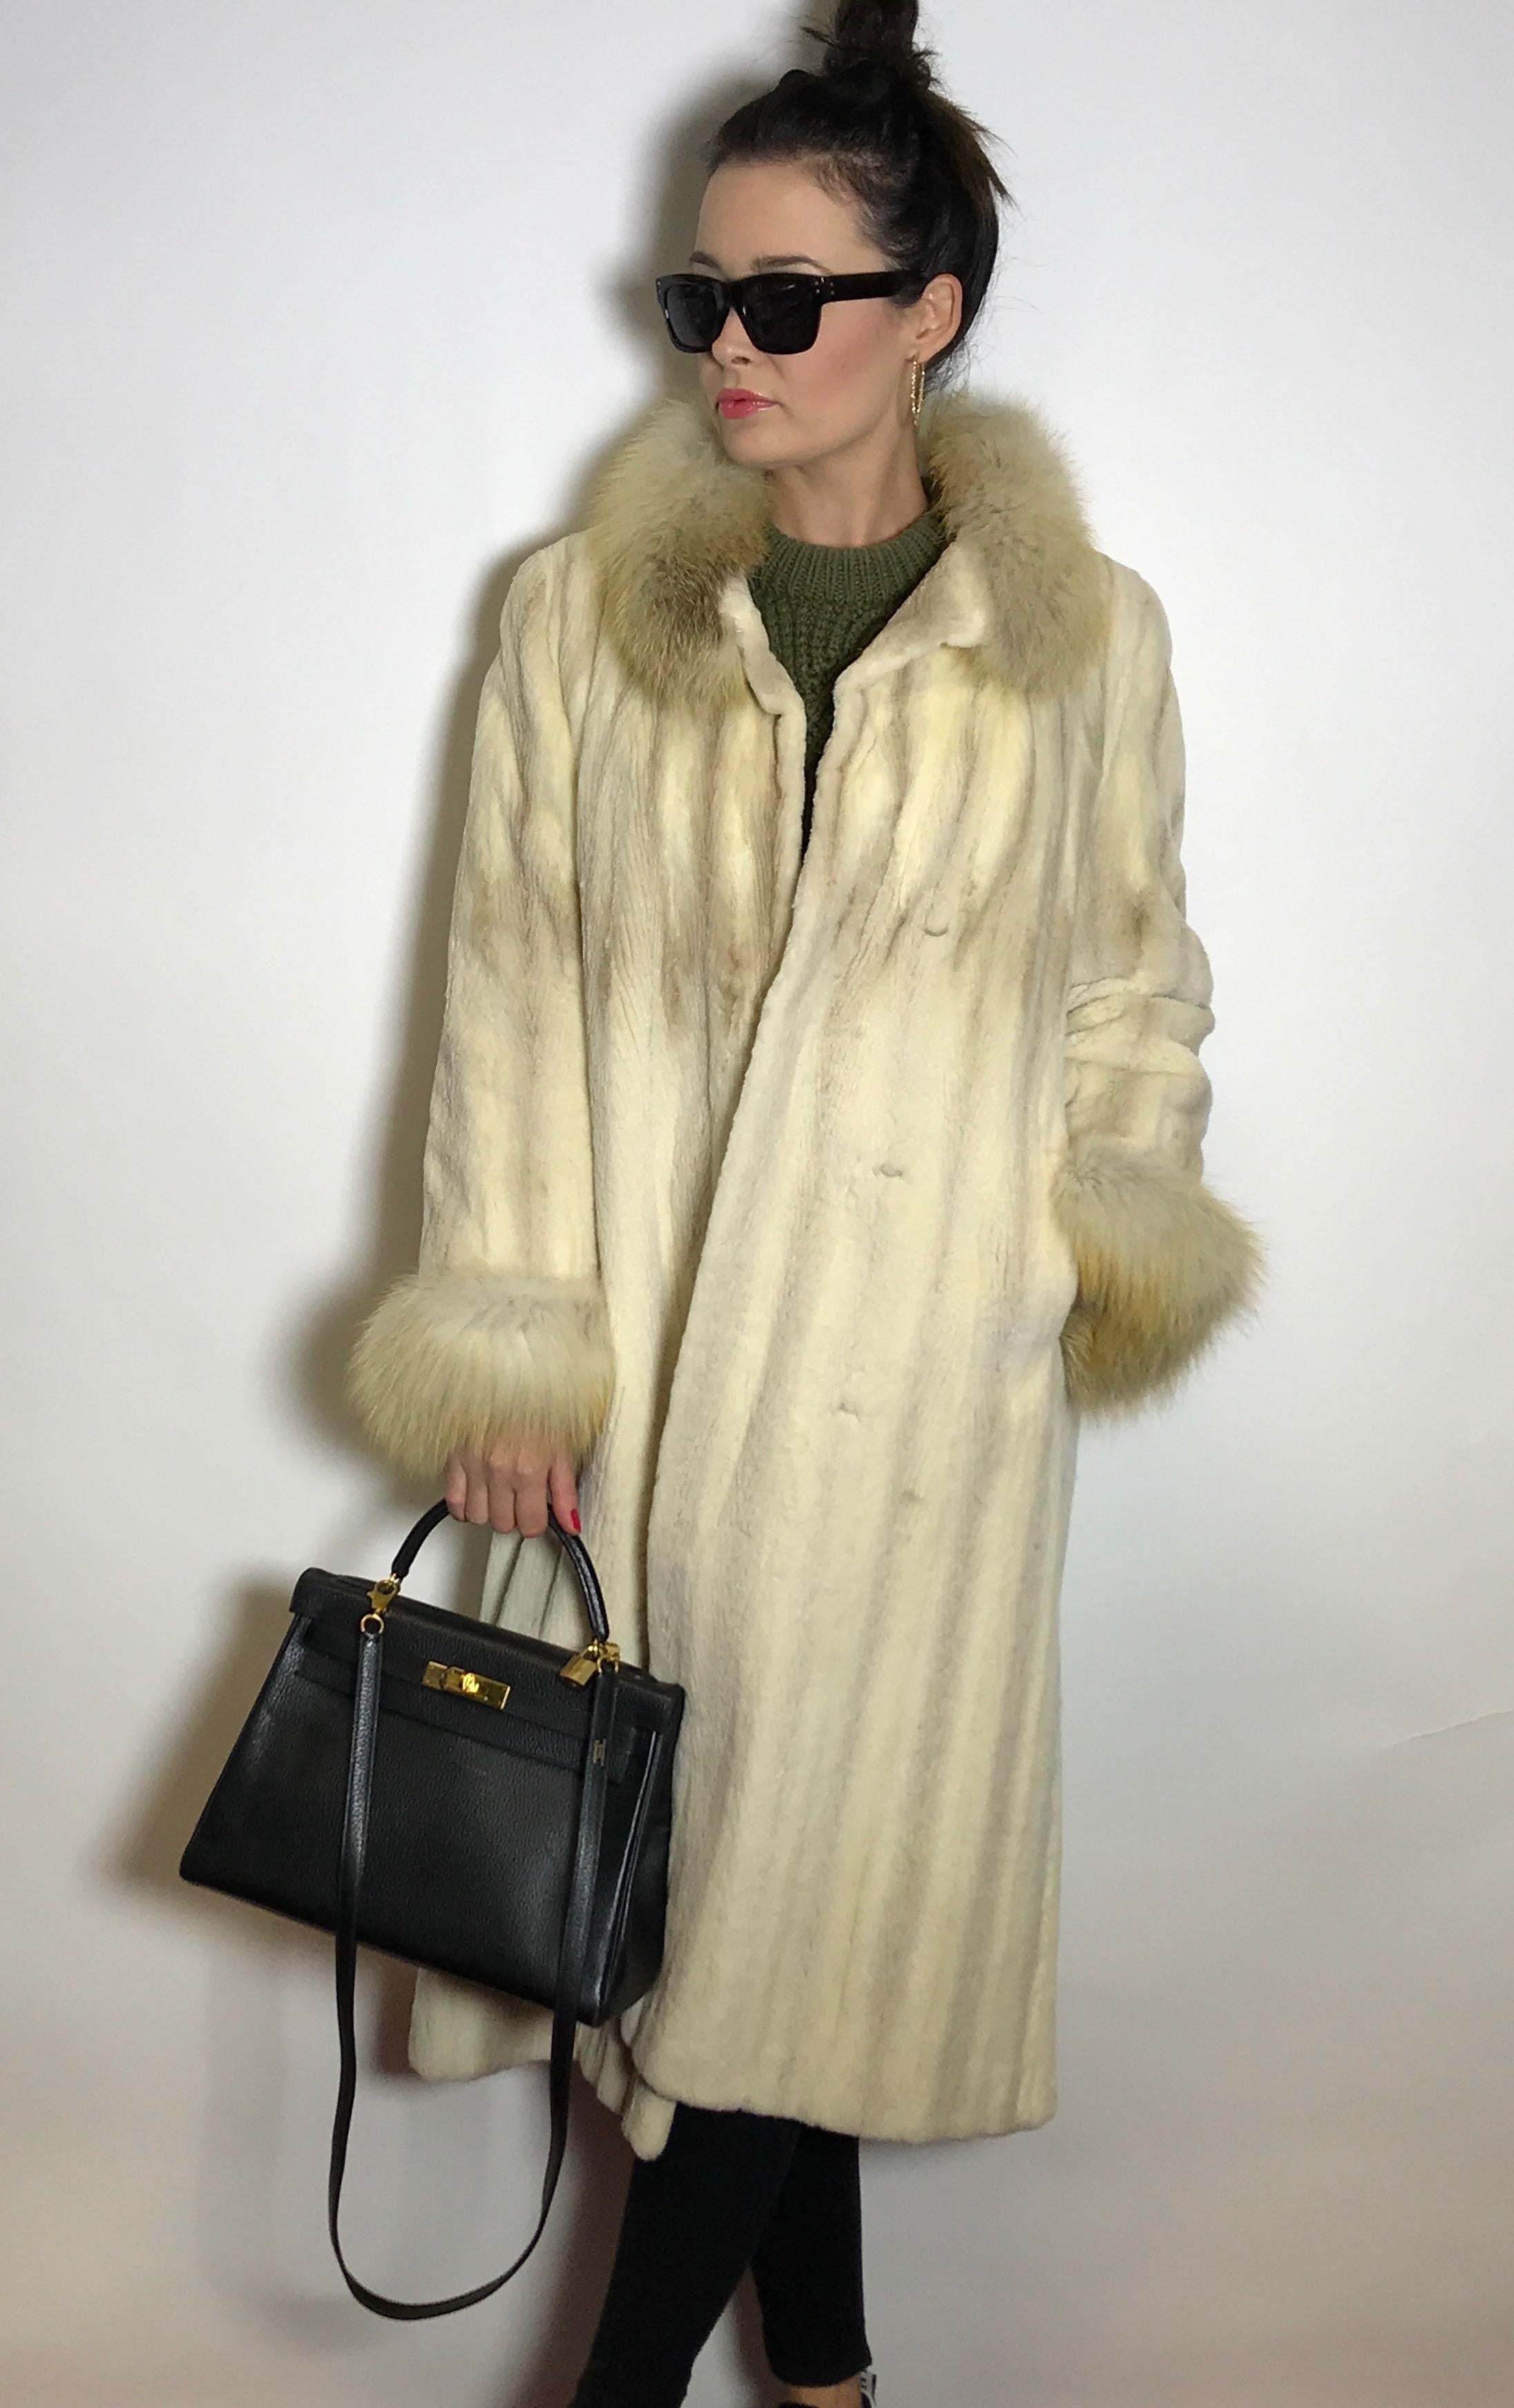 Floor length sheared cross mink coat with fox collar & sleeves.
Exclusively made by the furrier.

Size EU: 36-38 / S
Total length: 116 cm
Shoulder width: 41cm
Sleeve length: 55 cm

The coat is in excellent condition, almost never worn.

- Our model